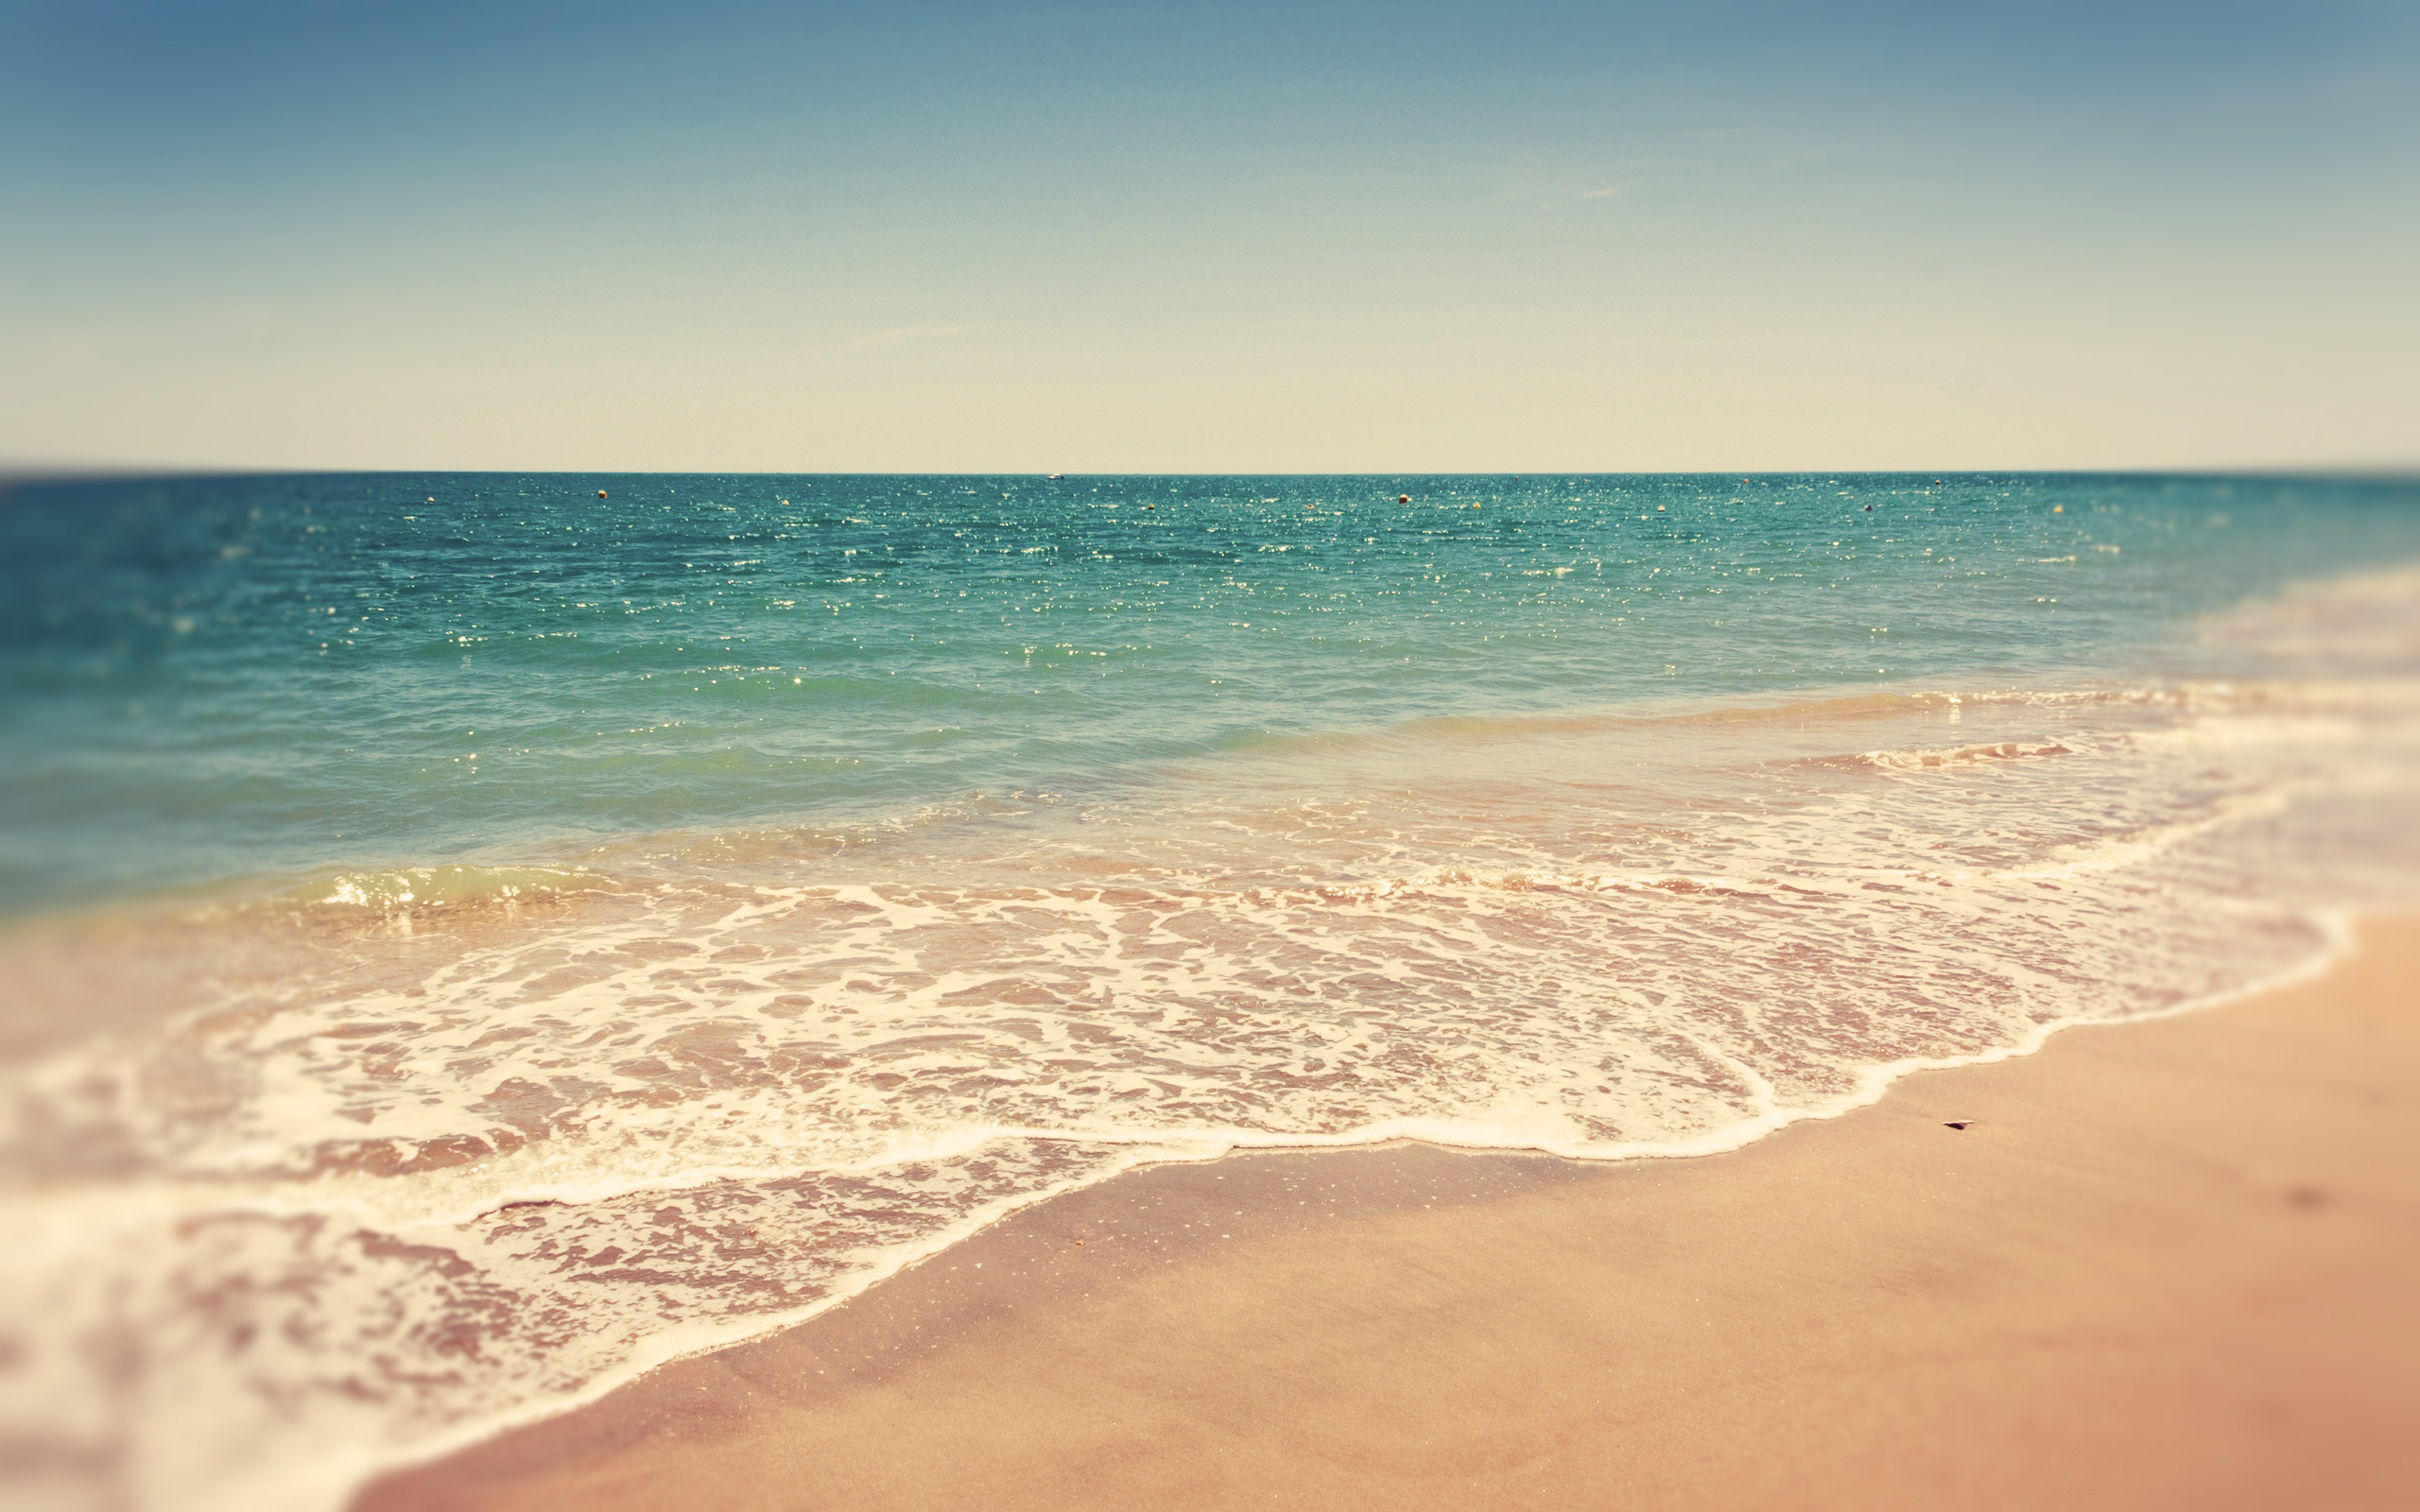 Dream Summer Retro Beach Is A Great Wallpaper For Your